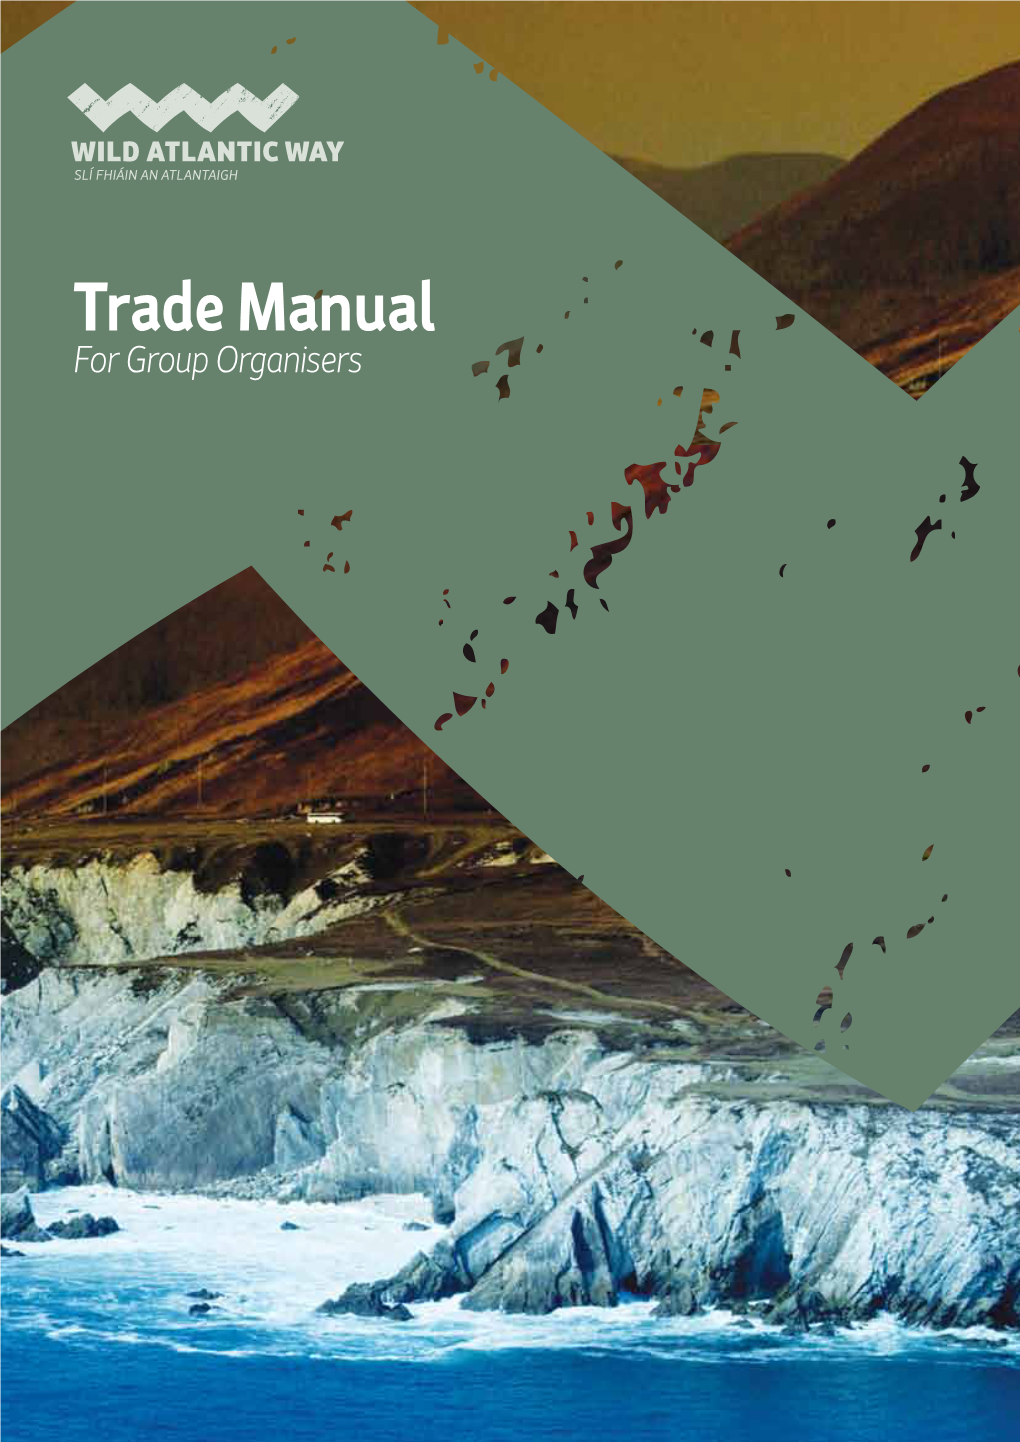 Trade Manual for Group Organisers CONTENTS